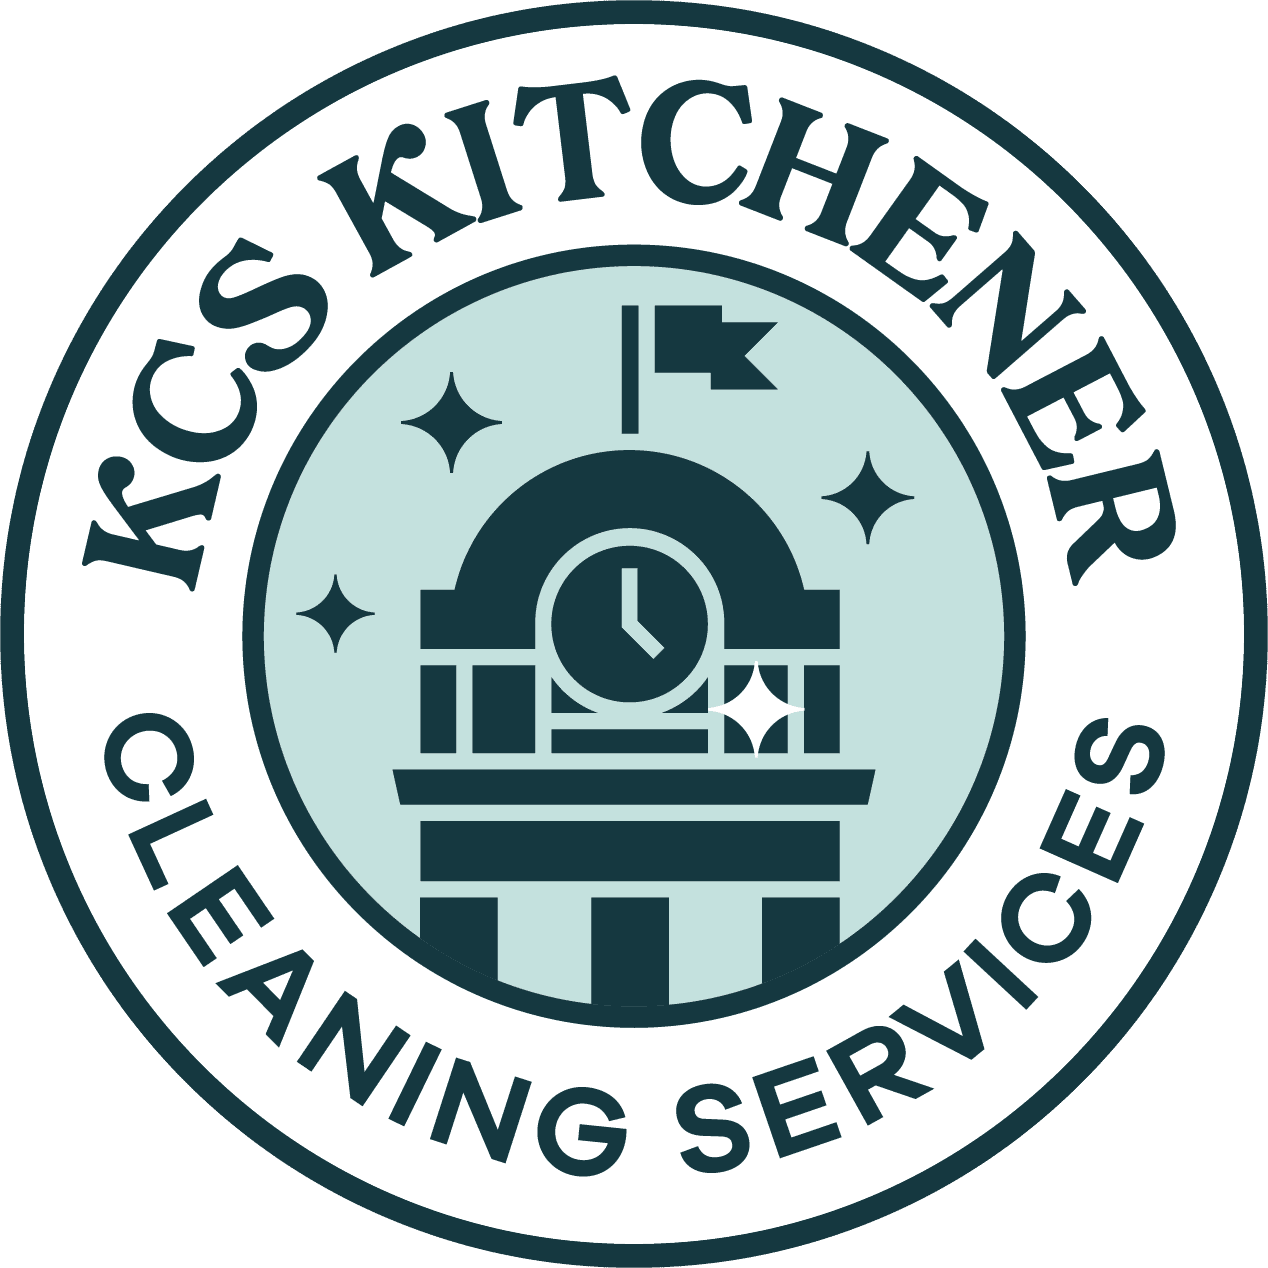 House Cleaning Services of Kitchener-Waterloo